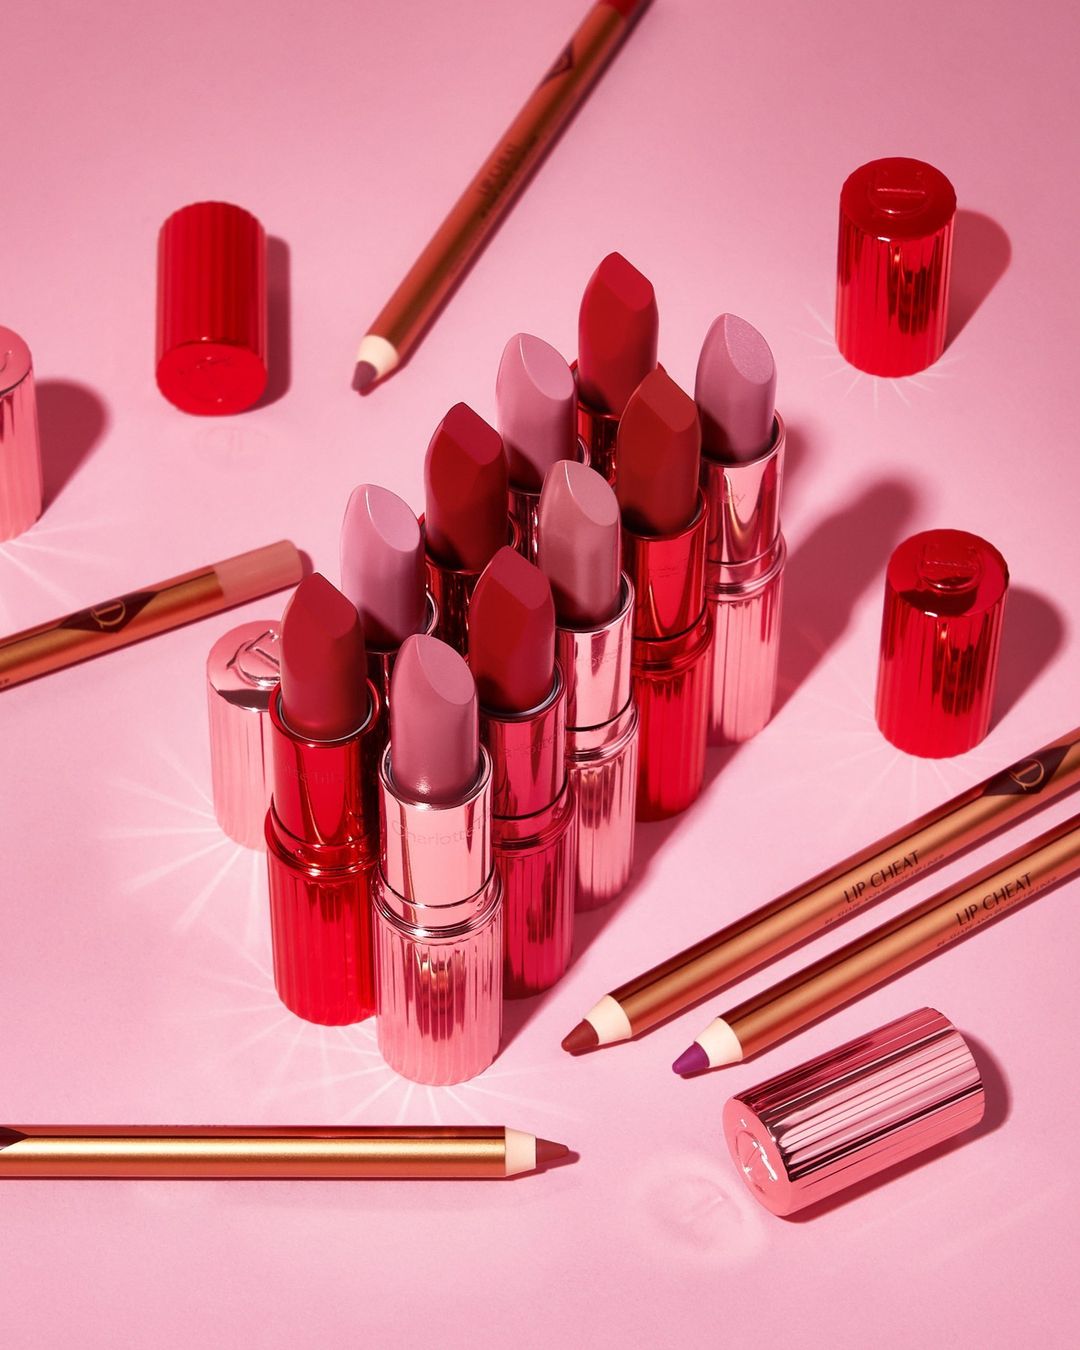 Charlotte Tilbury’s lipsticks are proud to be one of the cruelty-free brands in the market